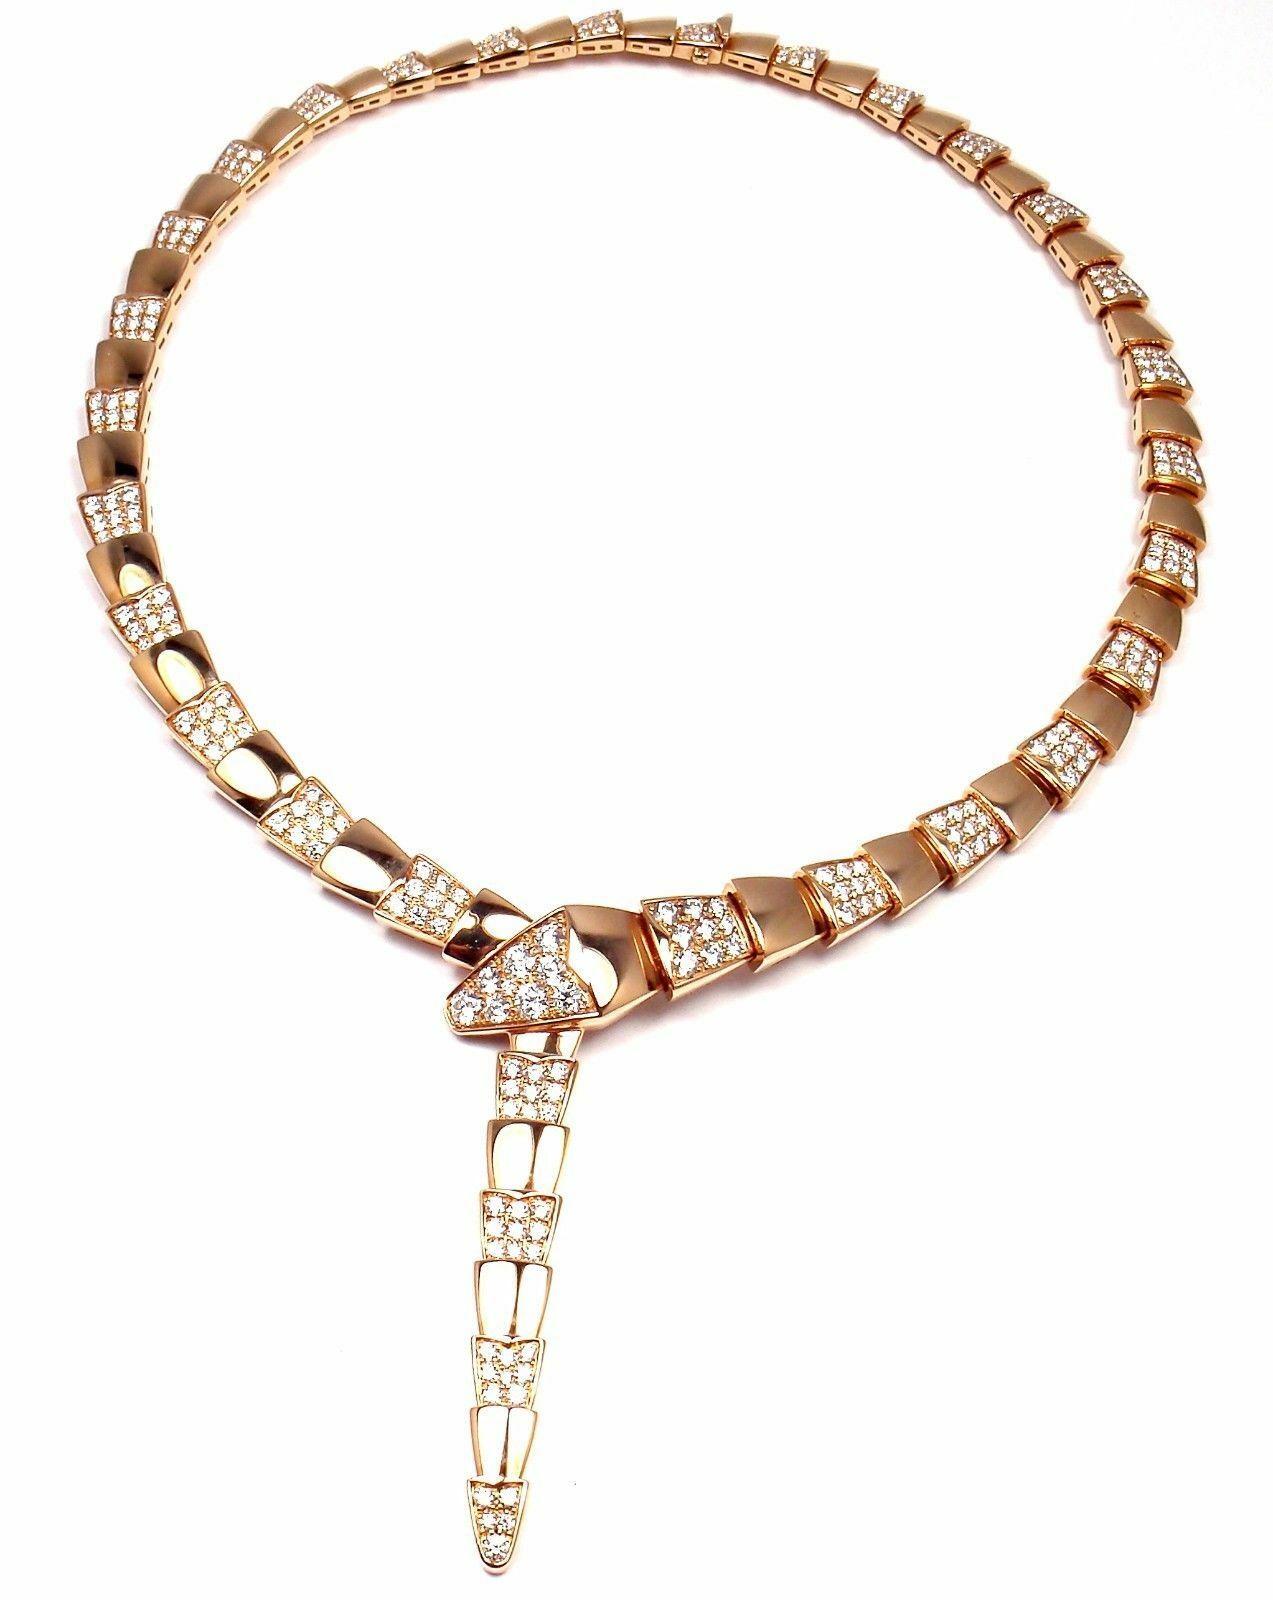 18k Rose Gold Pave Diamond Serpenti Necklace by Bulgari. 
With 283 round cut diamonds VVS1 clarity, E color.
This necklace comes with Bulgari Box, Pouch, and Authenticity Certificate.
Retail Price for this necklace is $76,000 plus